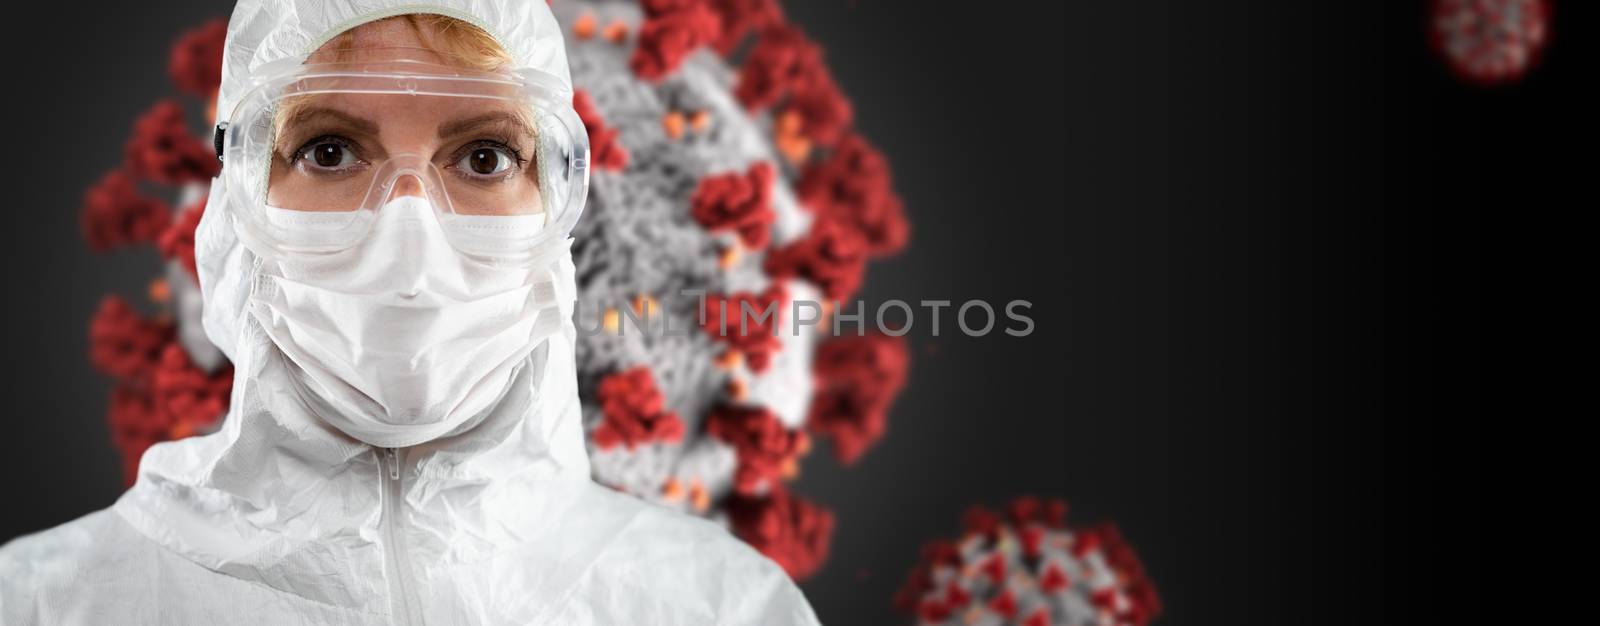 Banner of Female Doctor or Nurse In Medical Face Mask and Protective Gear With Coronavirus Behind.